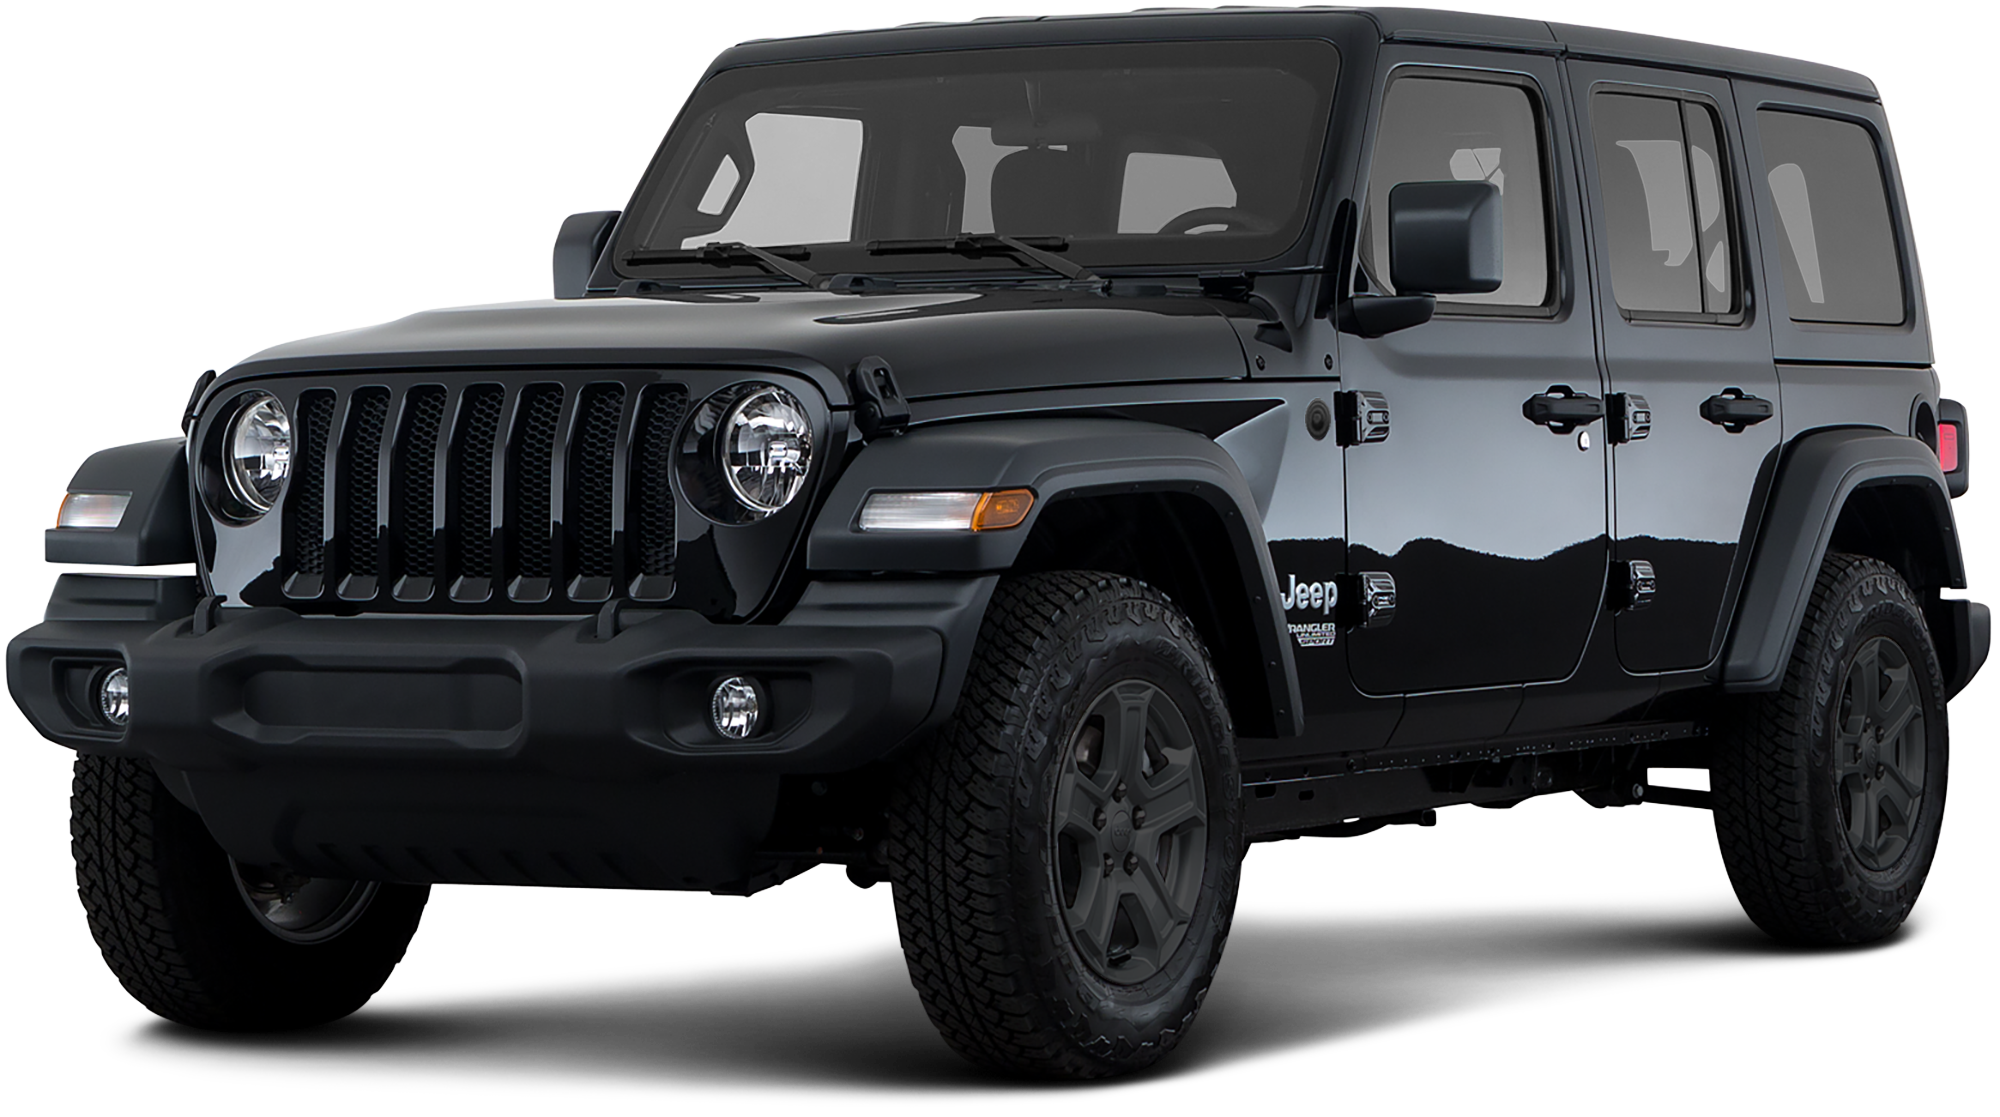 2020-jeep-wrangler-incentives-specials-offers-in-orange-tx